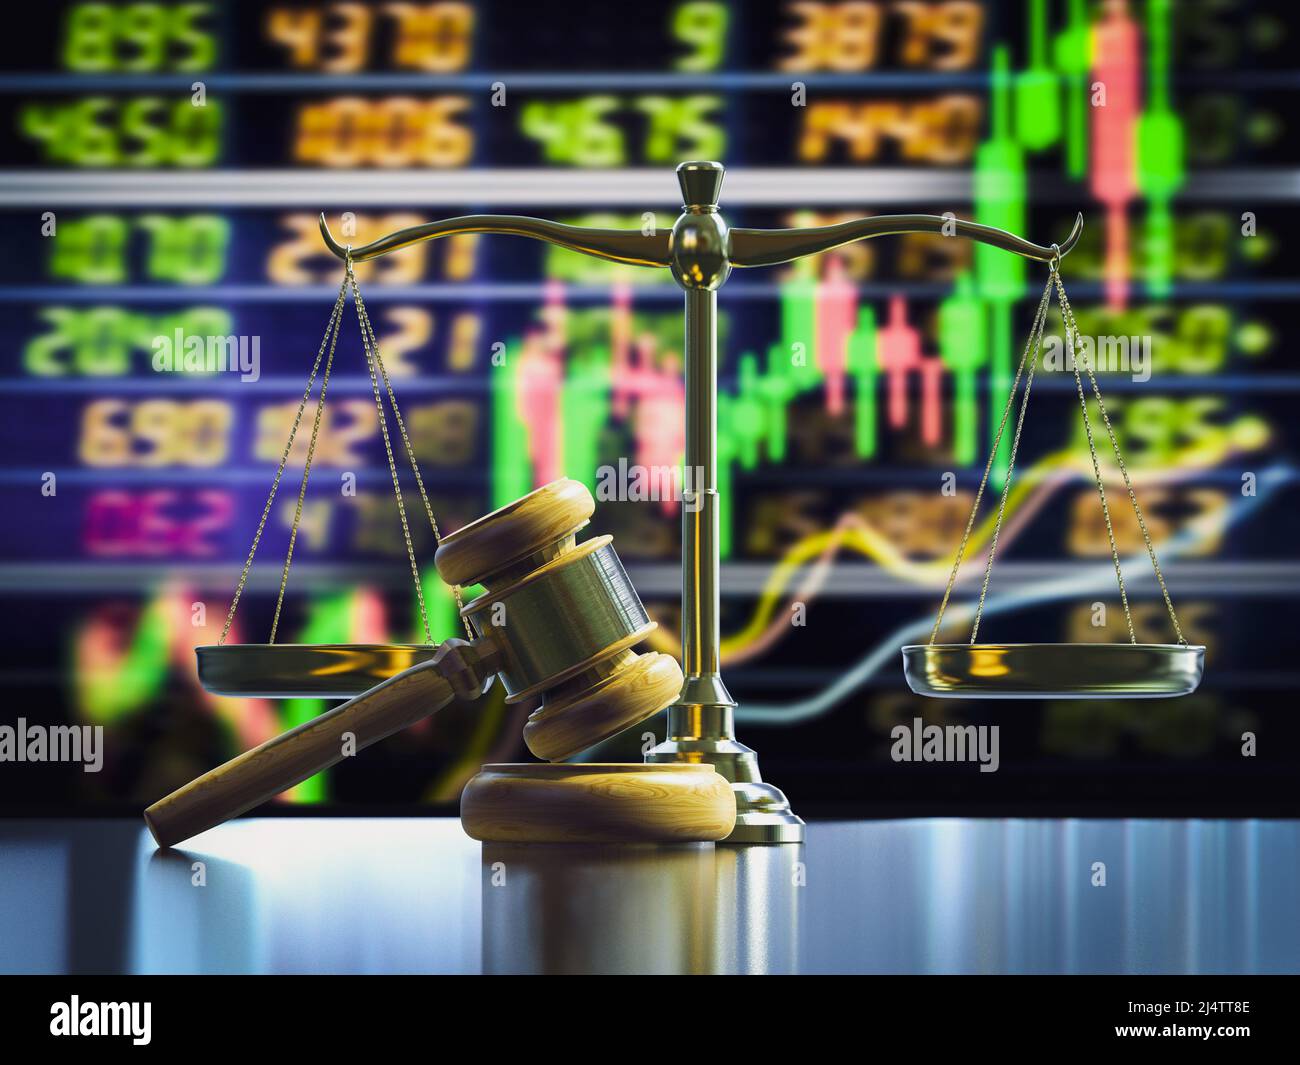 Financial law concept with 3d rendering law scale and gavel judge on stock market exchange board Stock Photo